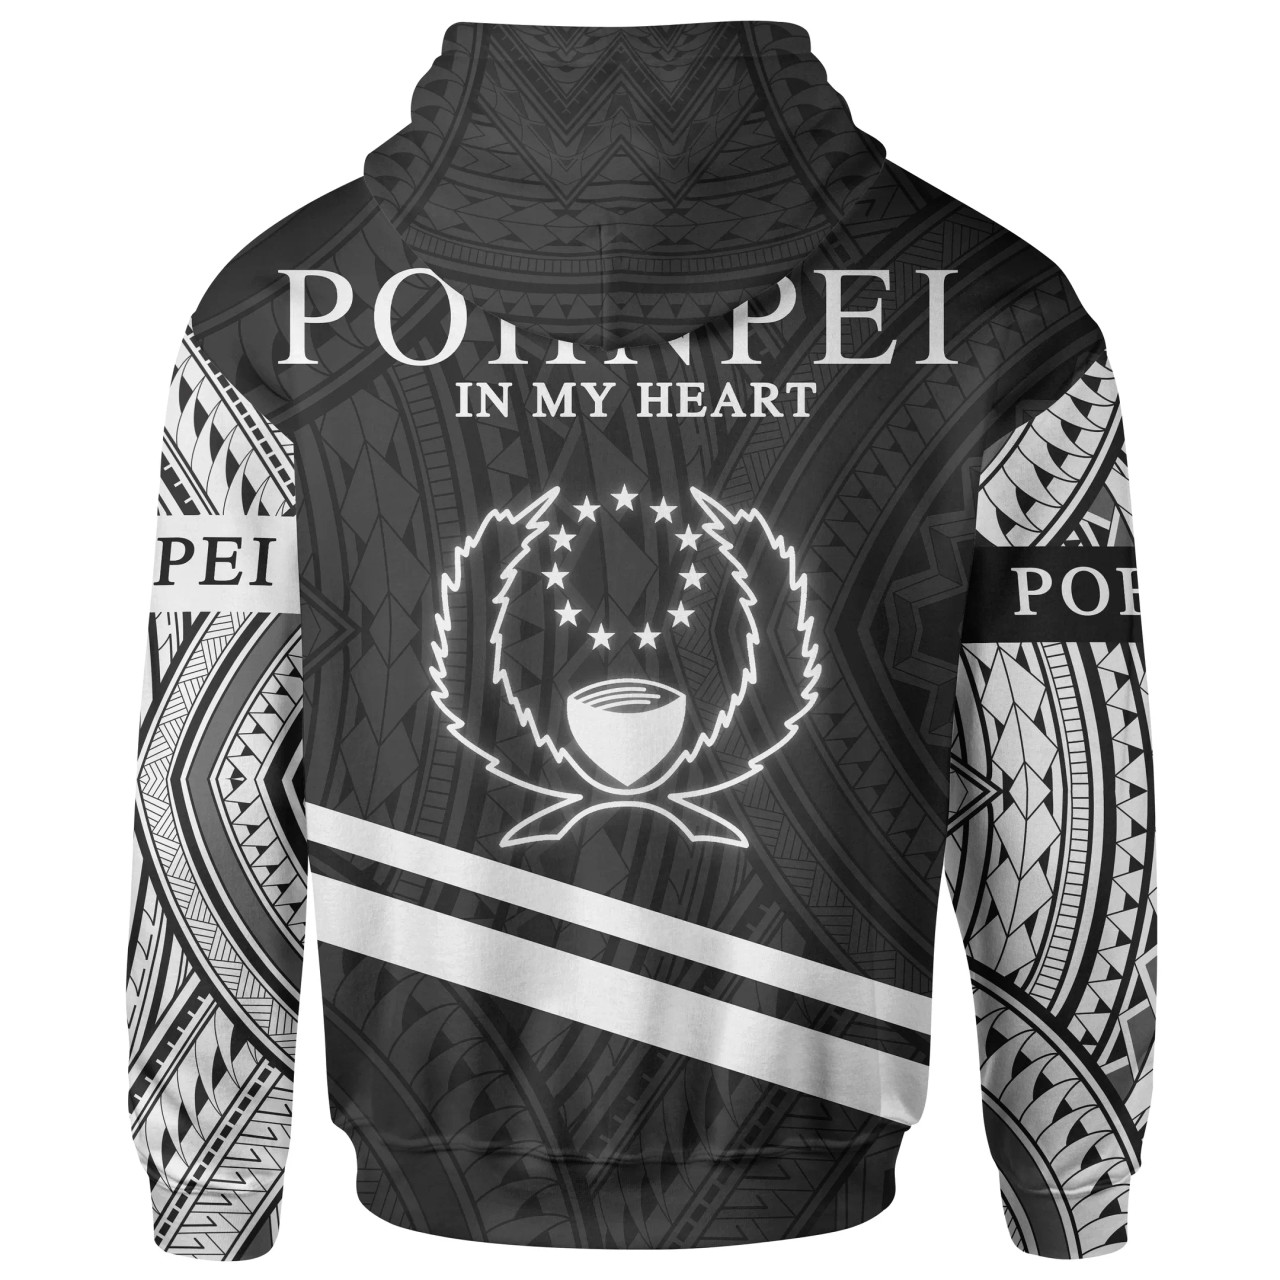 Pohnpei State Hoodie - In My Heart Style Polynesian Patterns